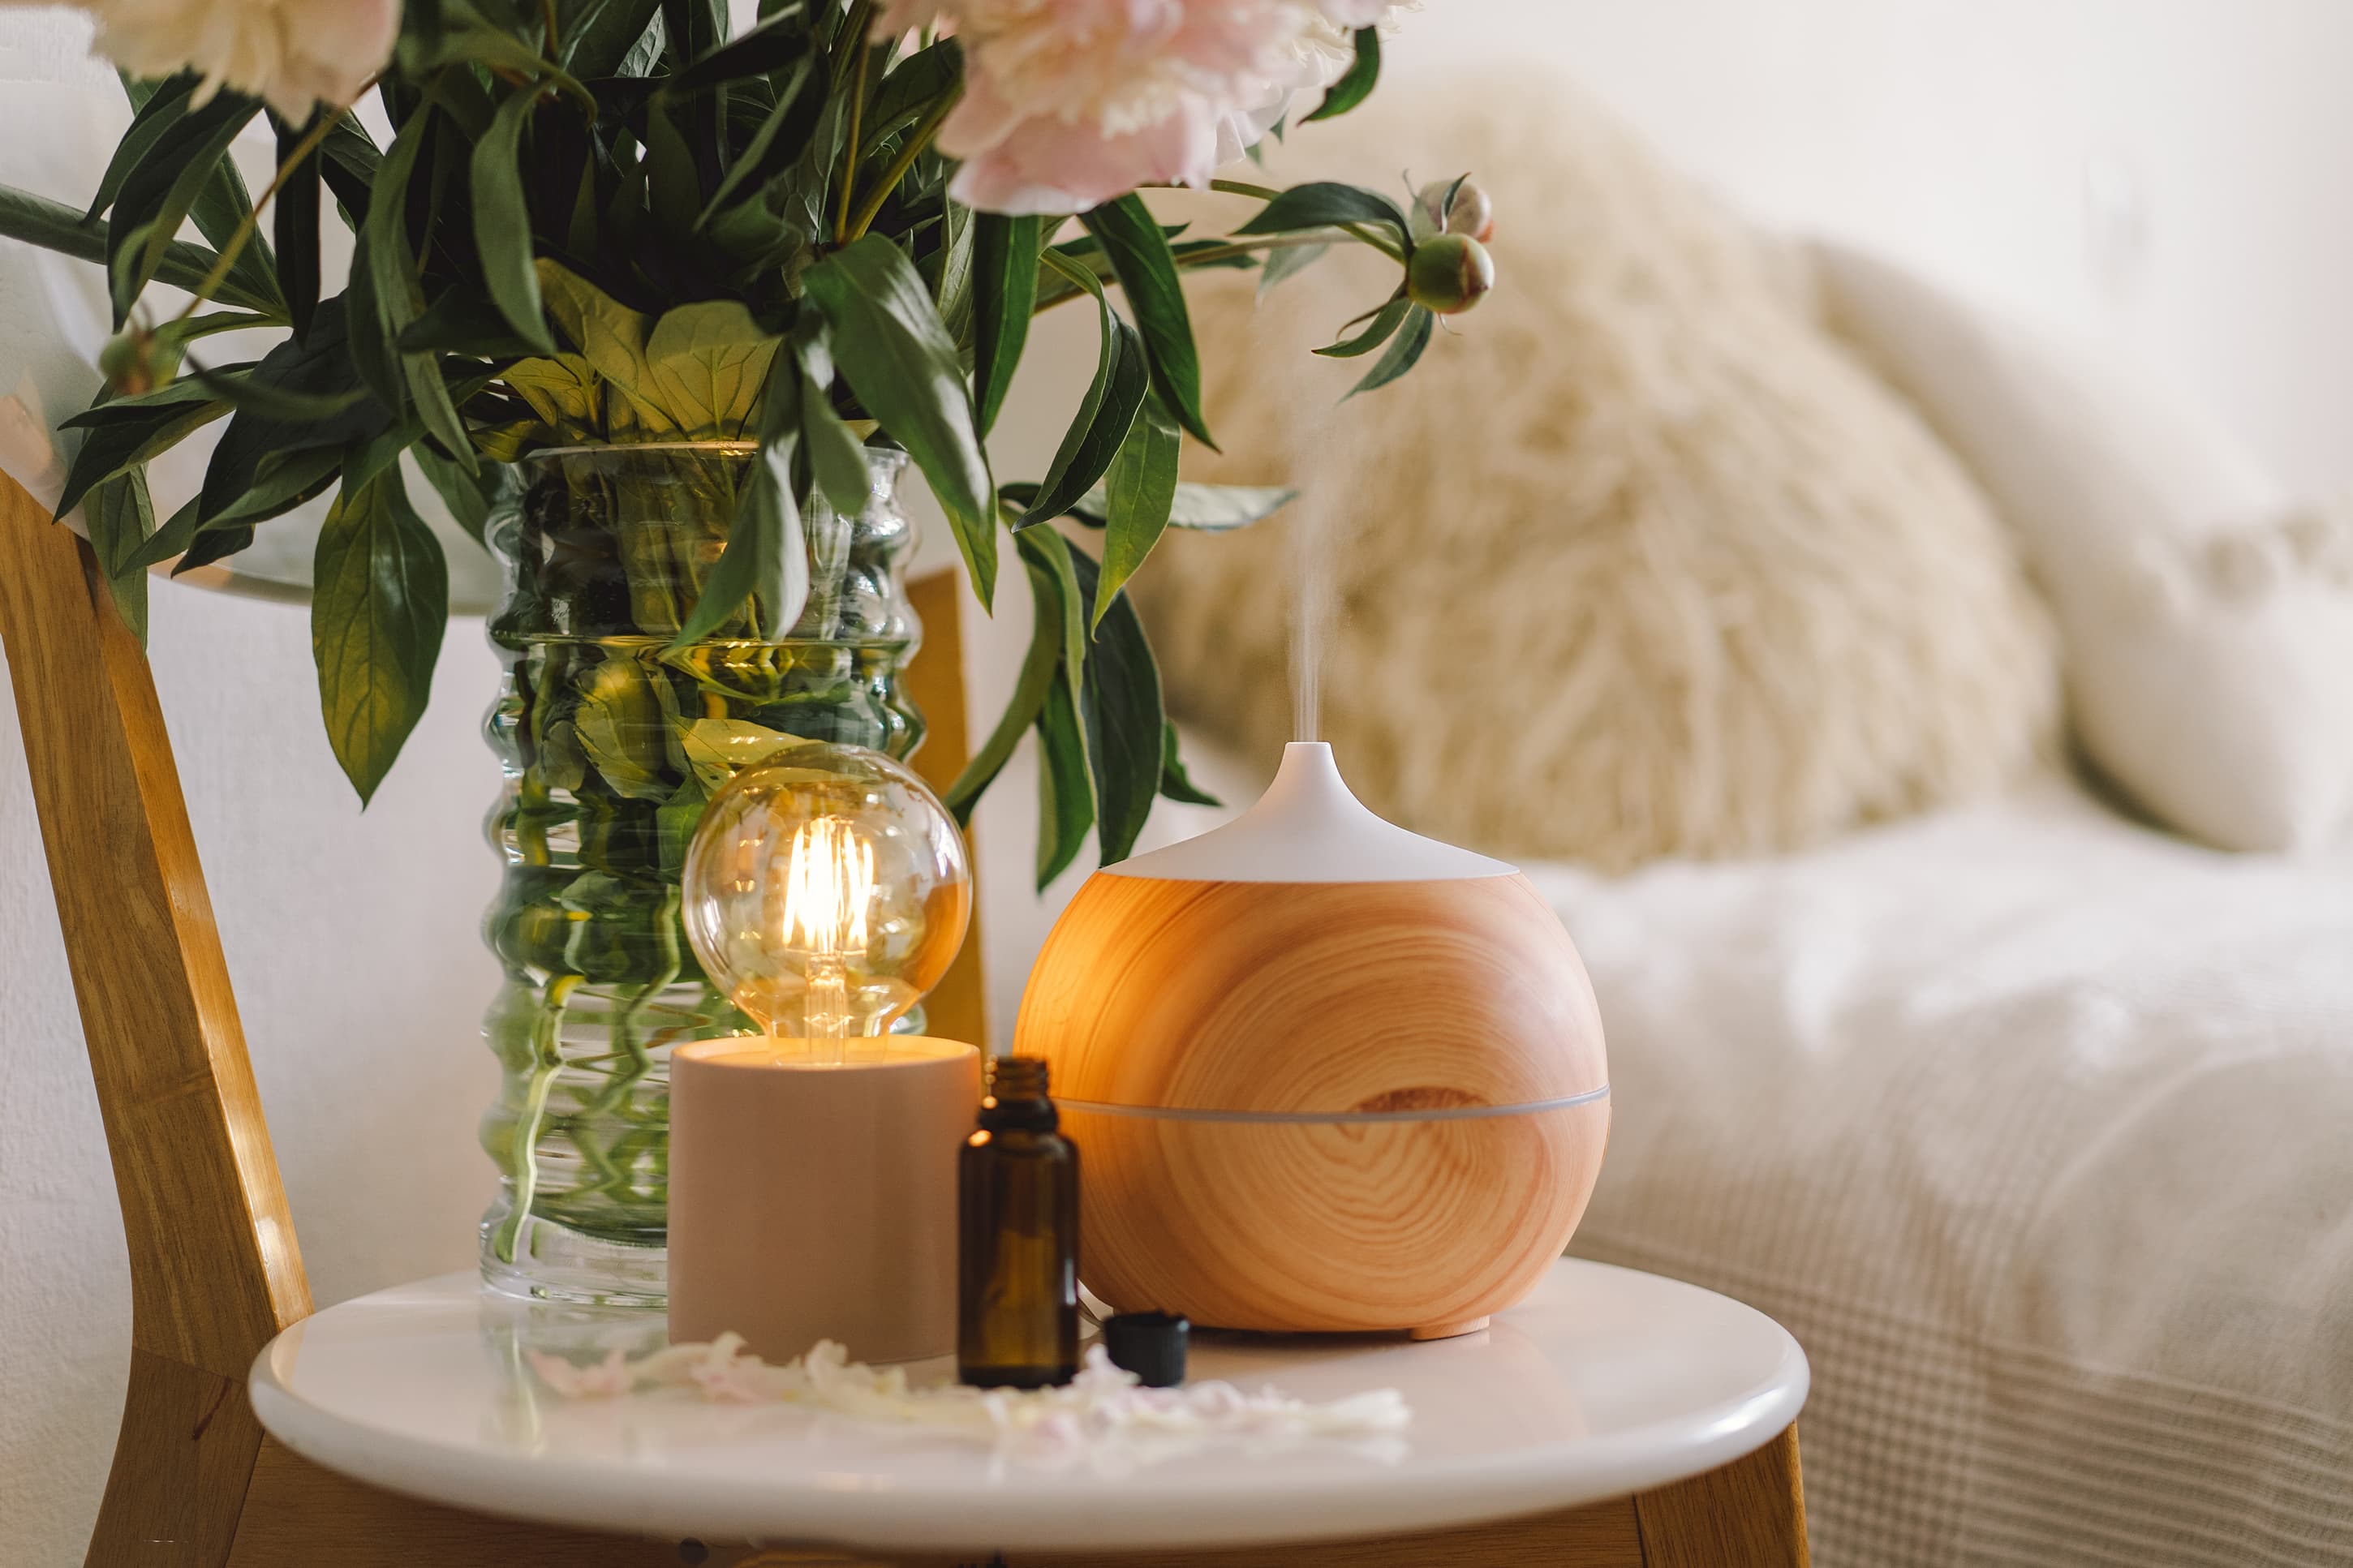 Aromatherapy Diffusers: 4 Different Types and How to Make Your Own